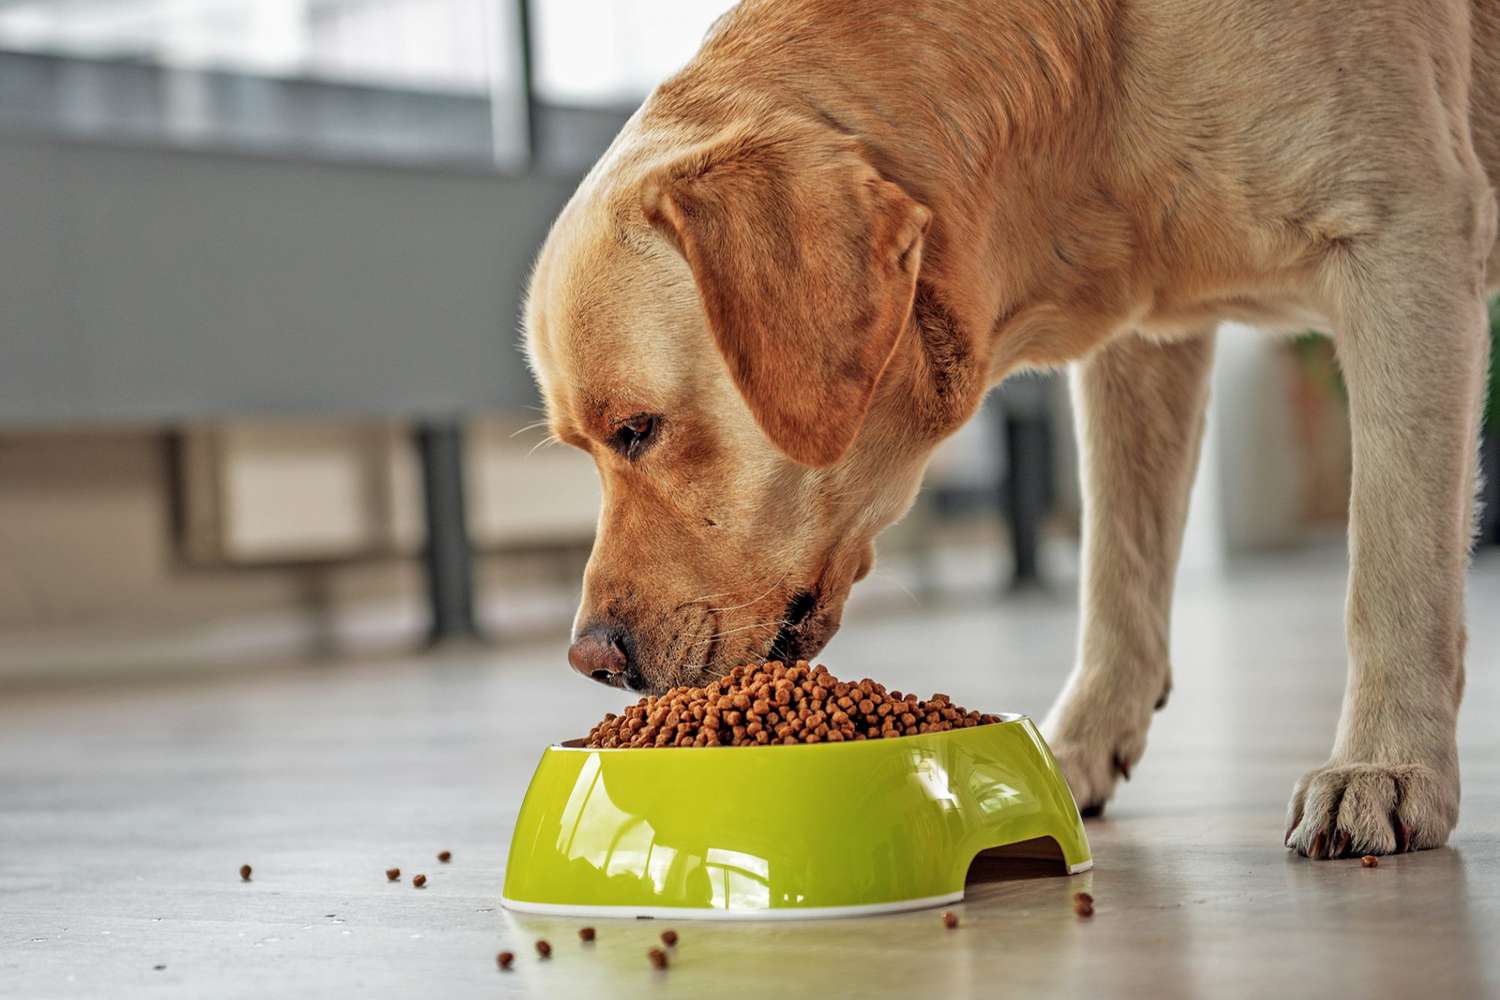 dog eating from food bowl